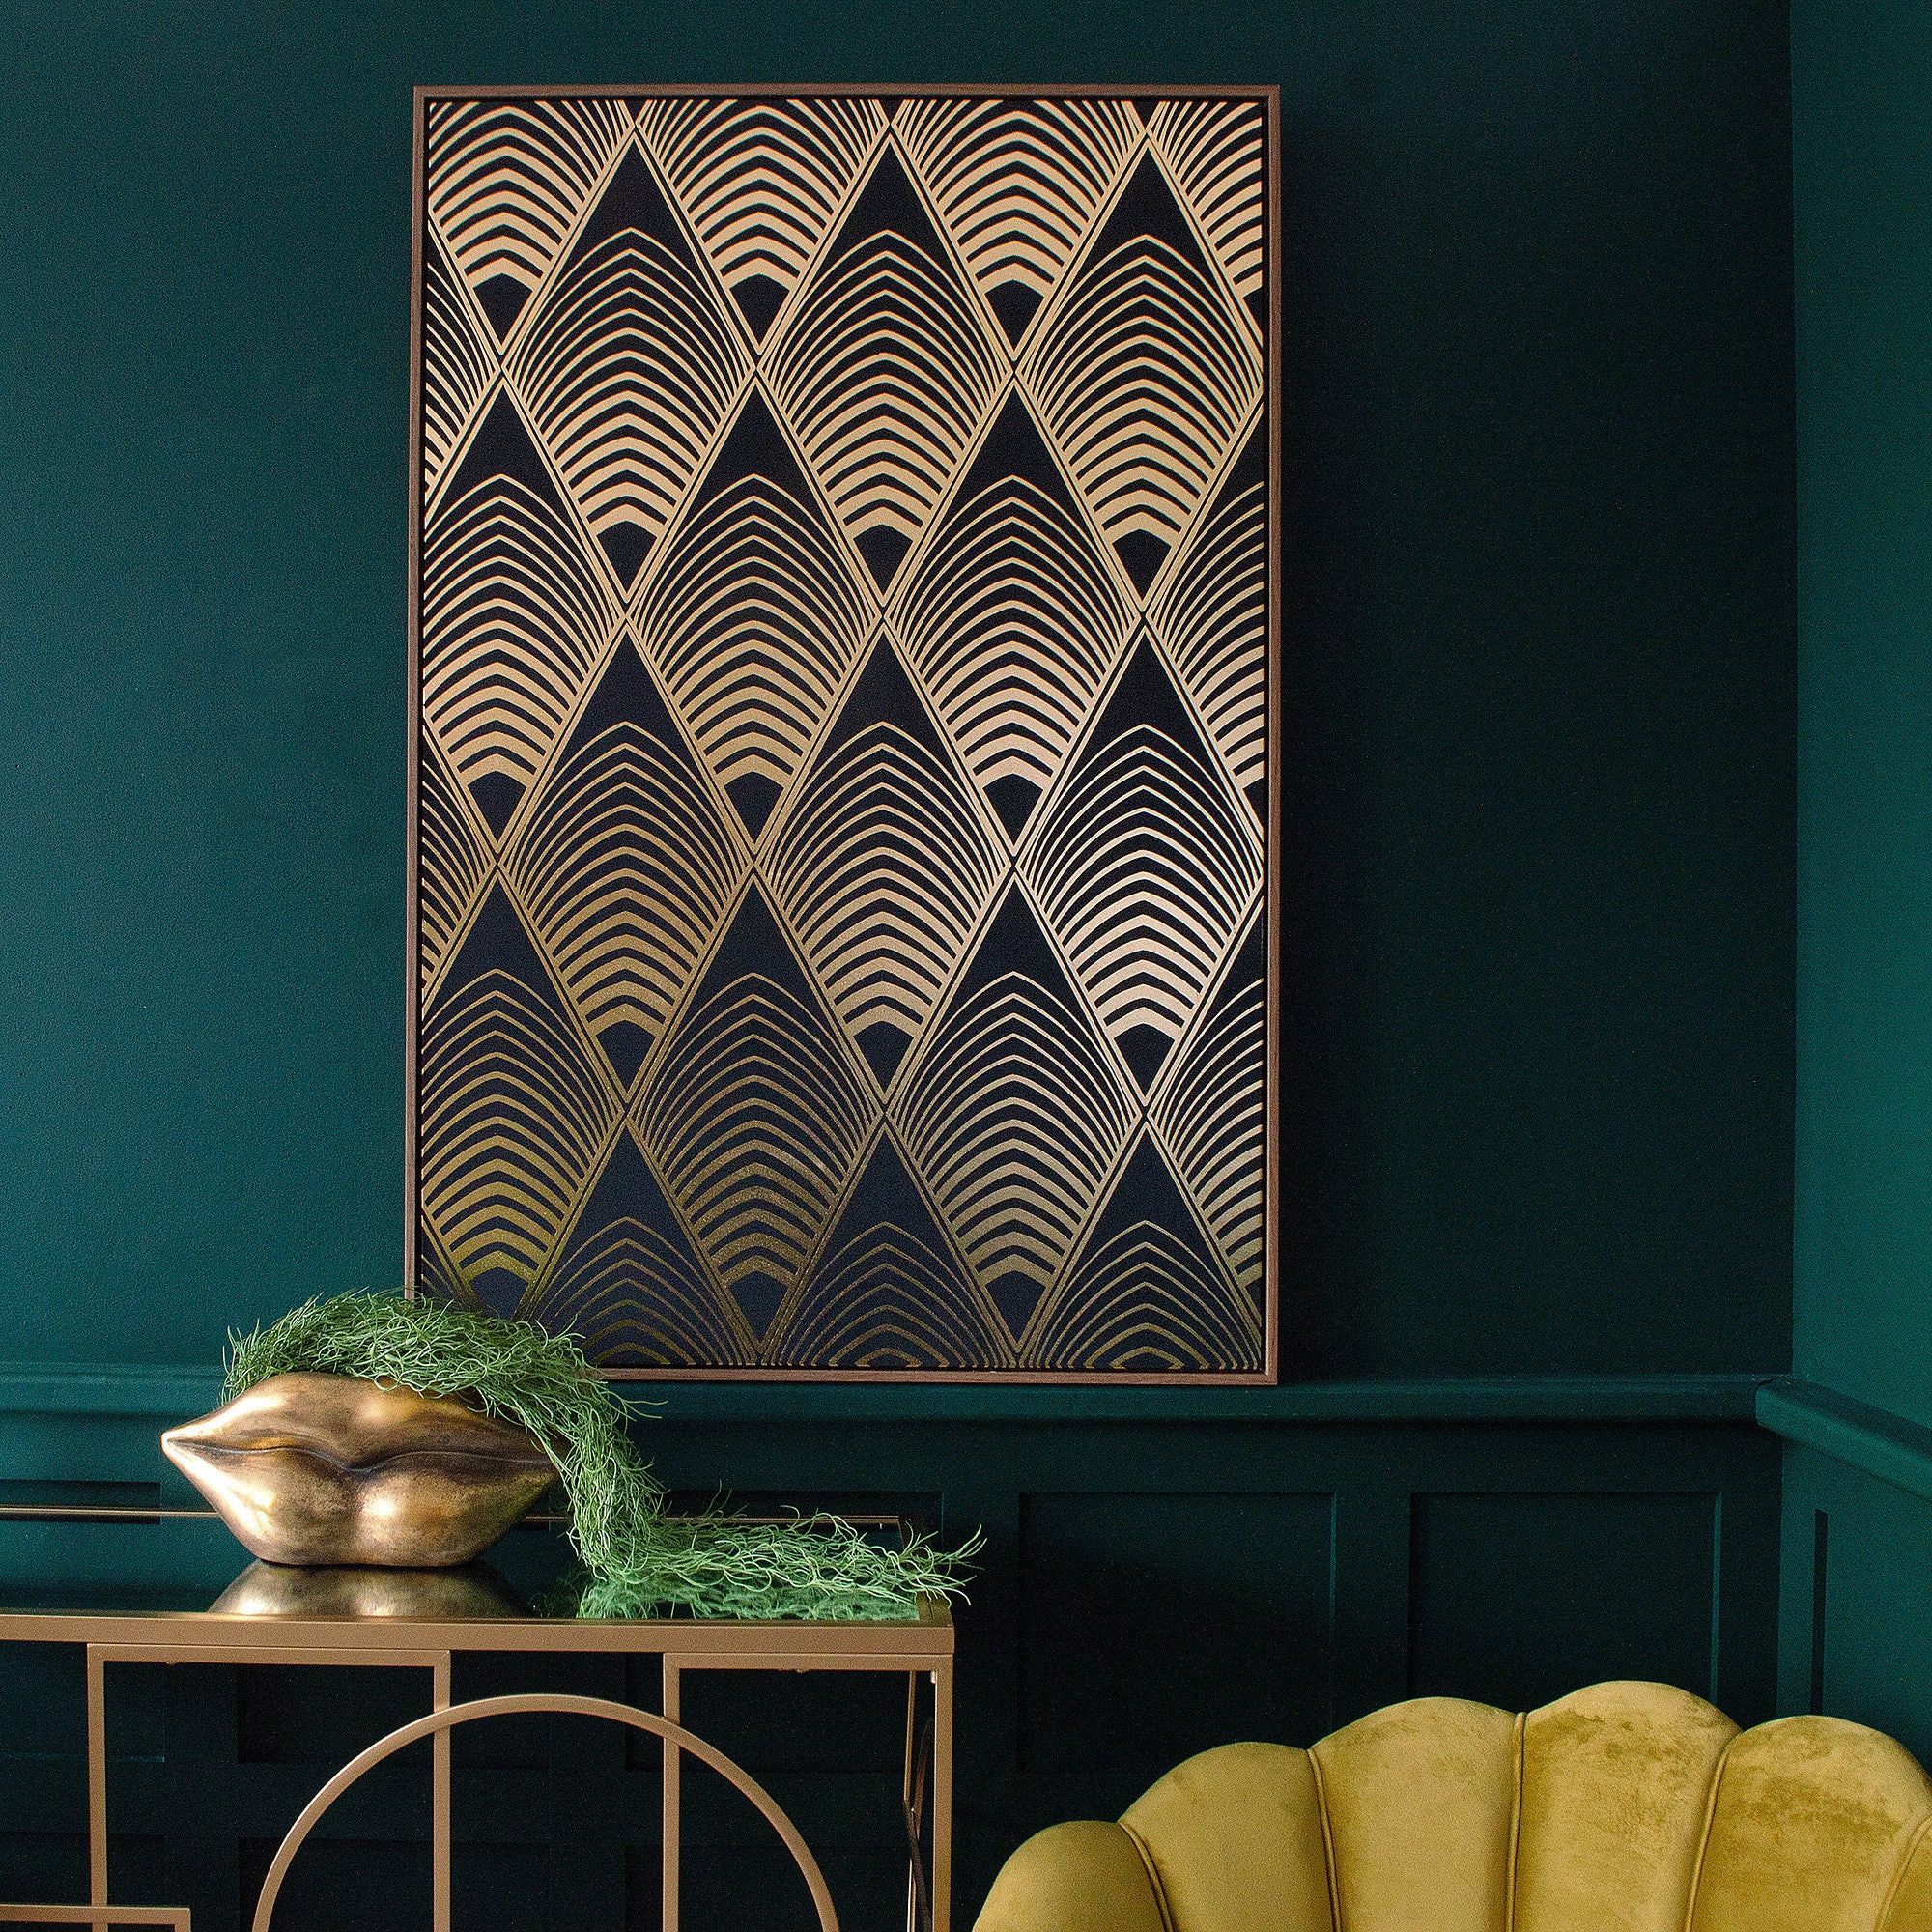 Art Deco Delight: A Glamorous Lounge With Geometric Patterns, Gold